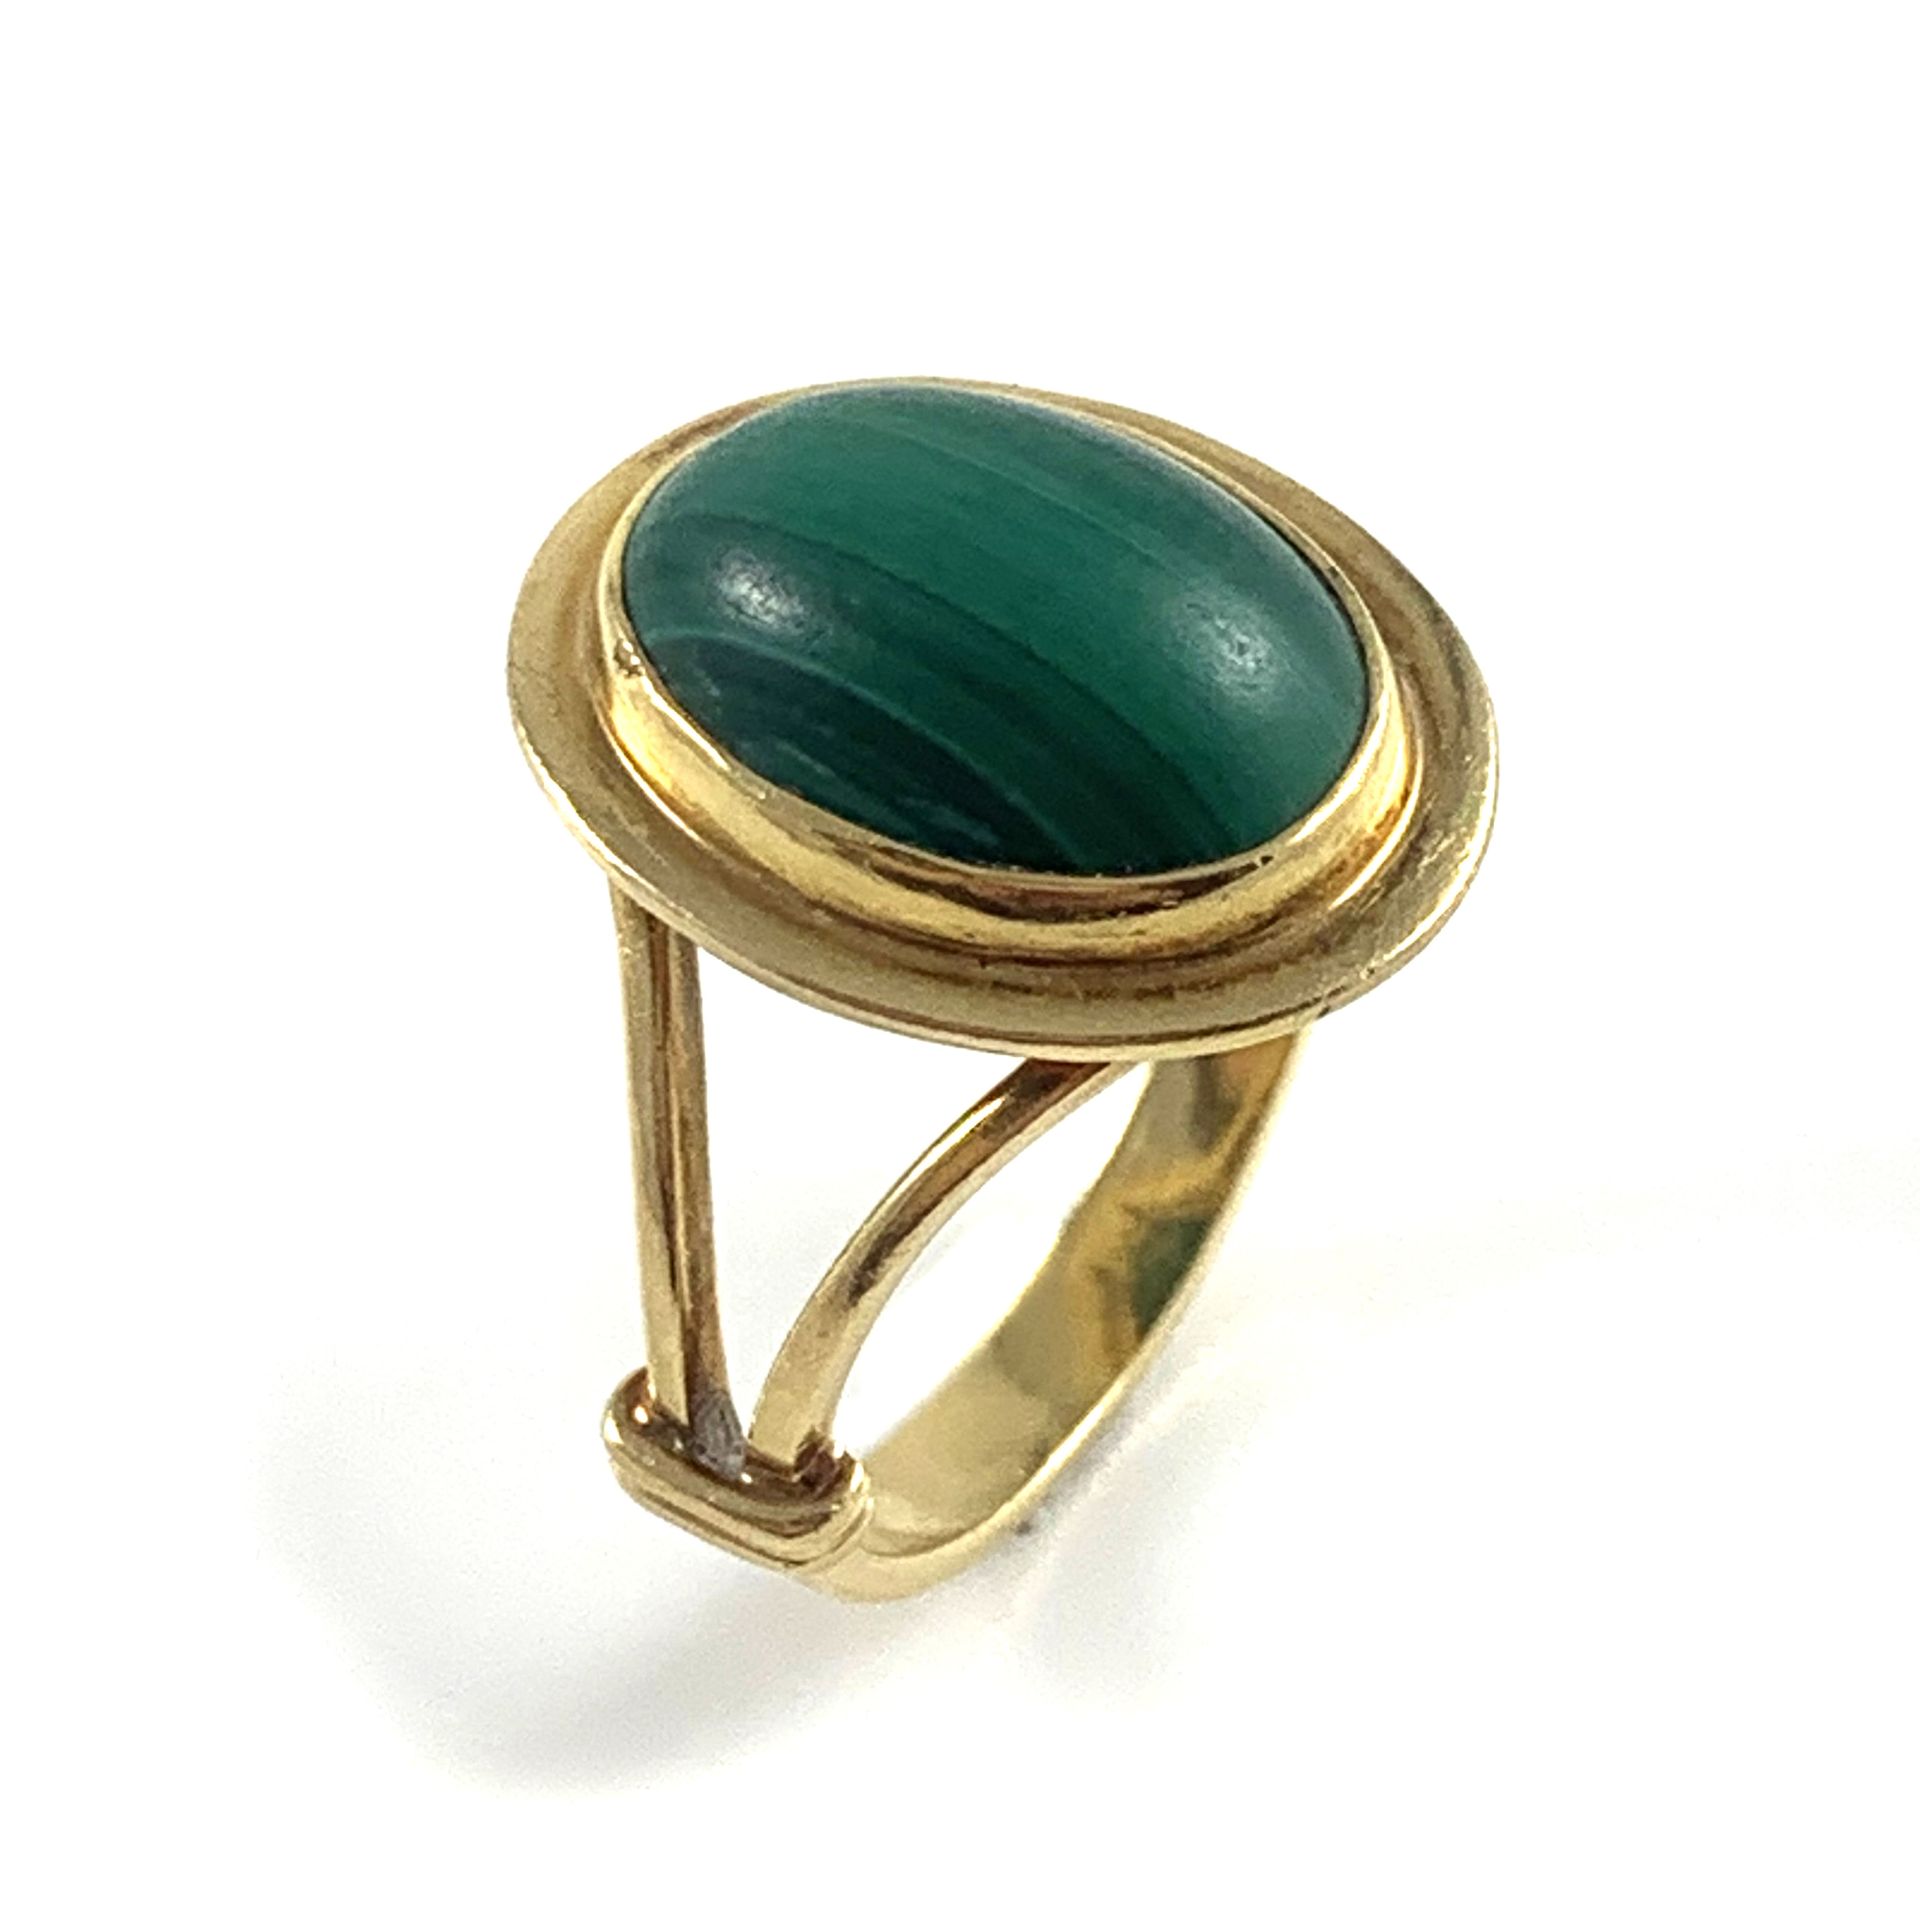 Null RING holding a malachite cabochon in a closed setting. 18K yellow gold sett&hellip;